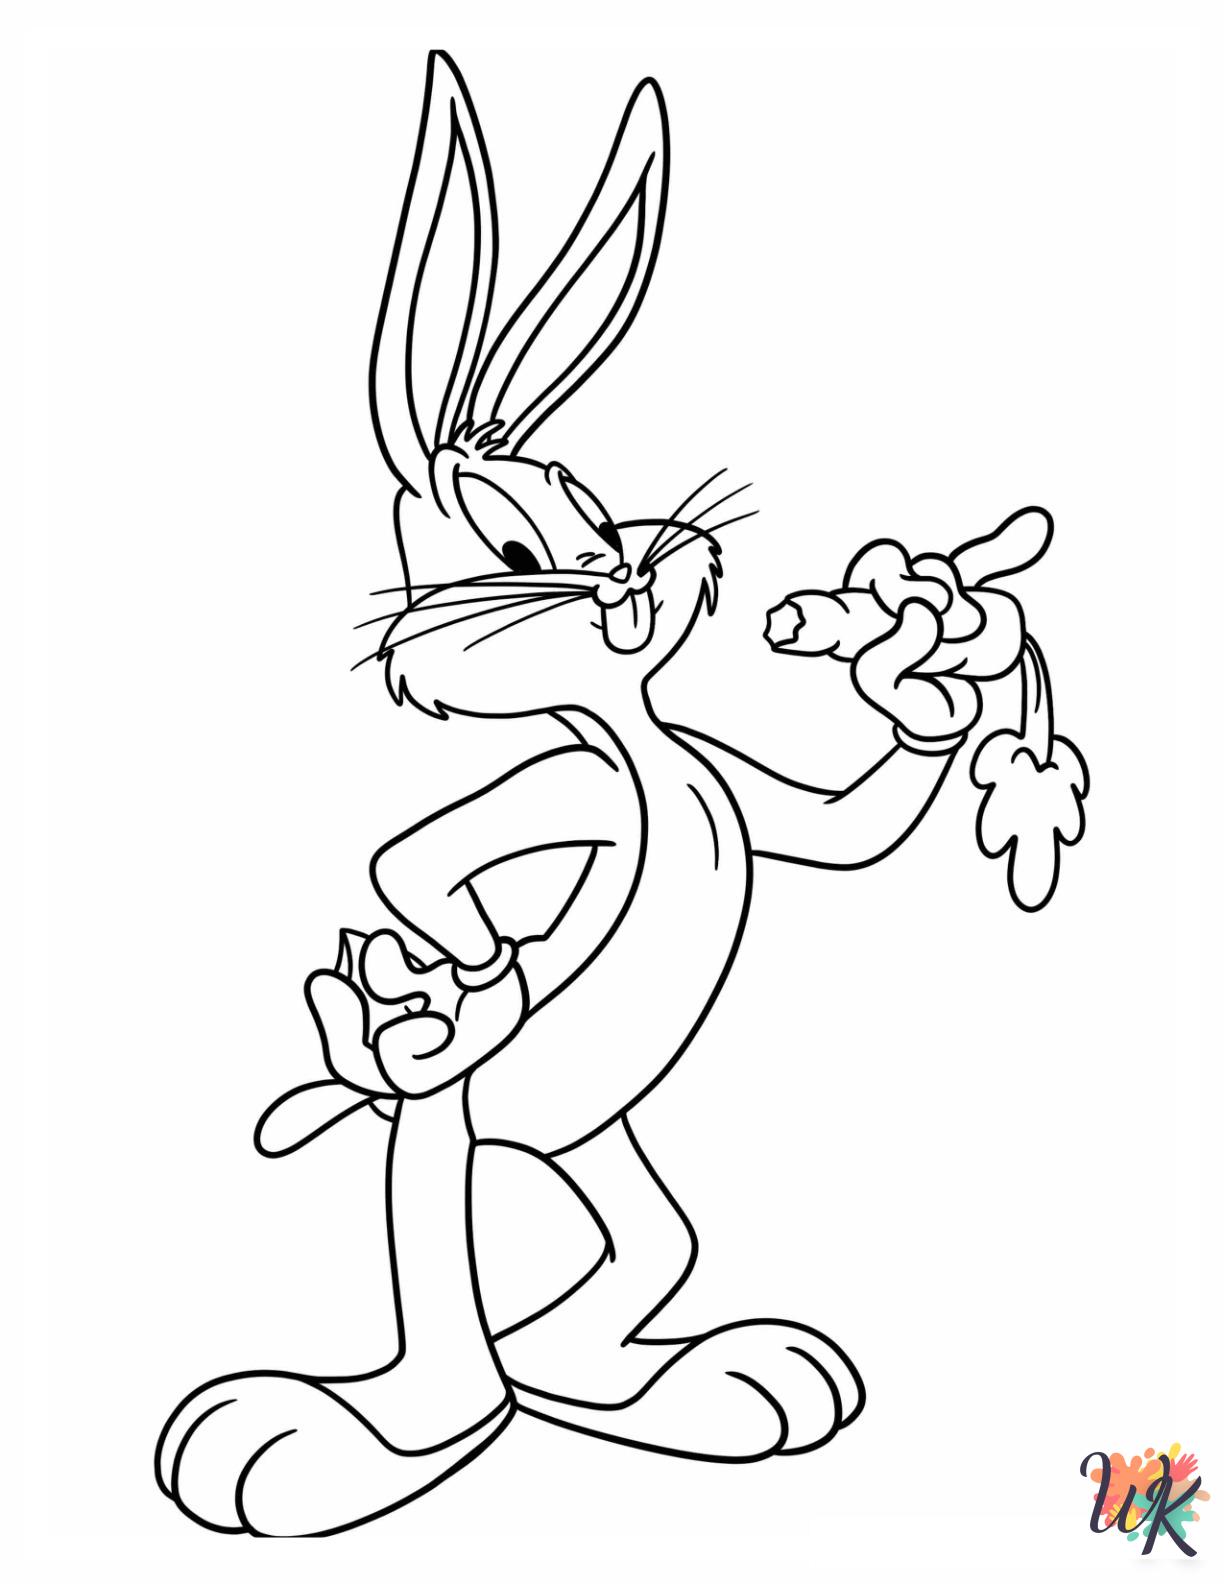 Bugs Bunny decorations coloring pages